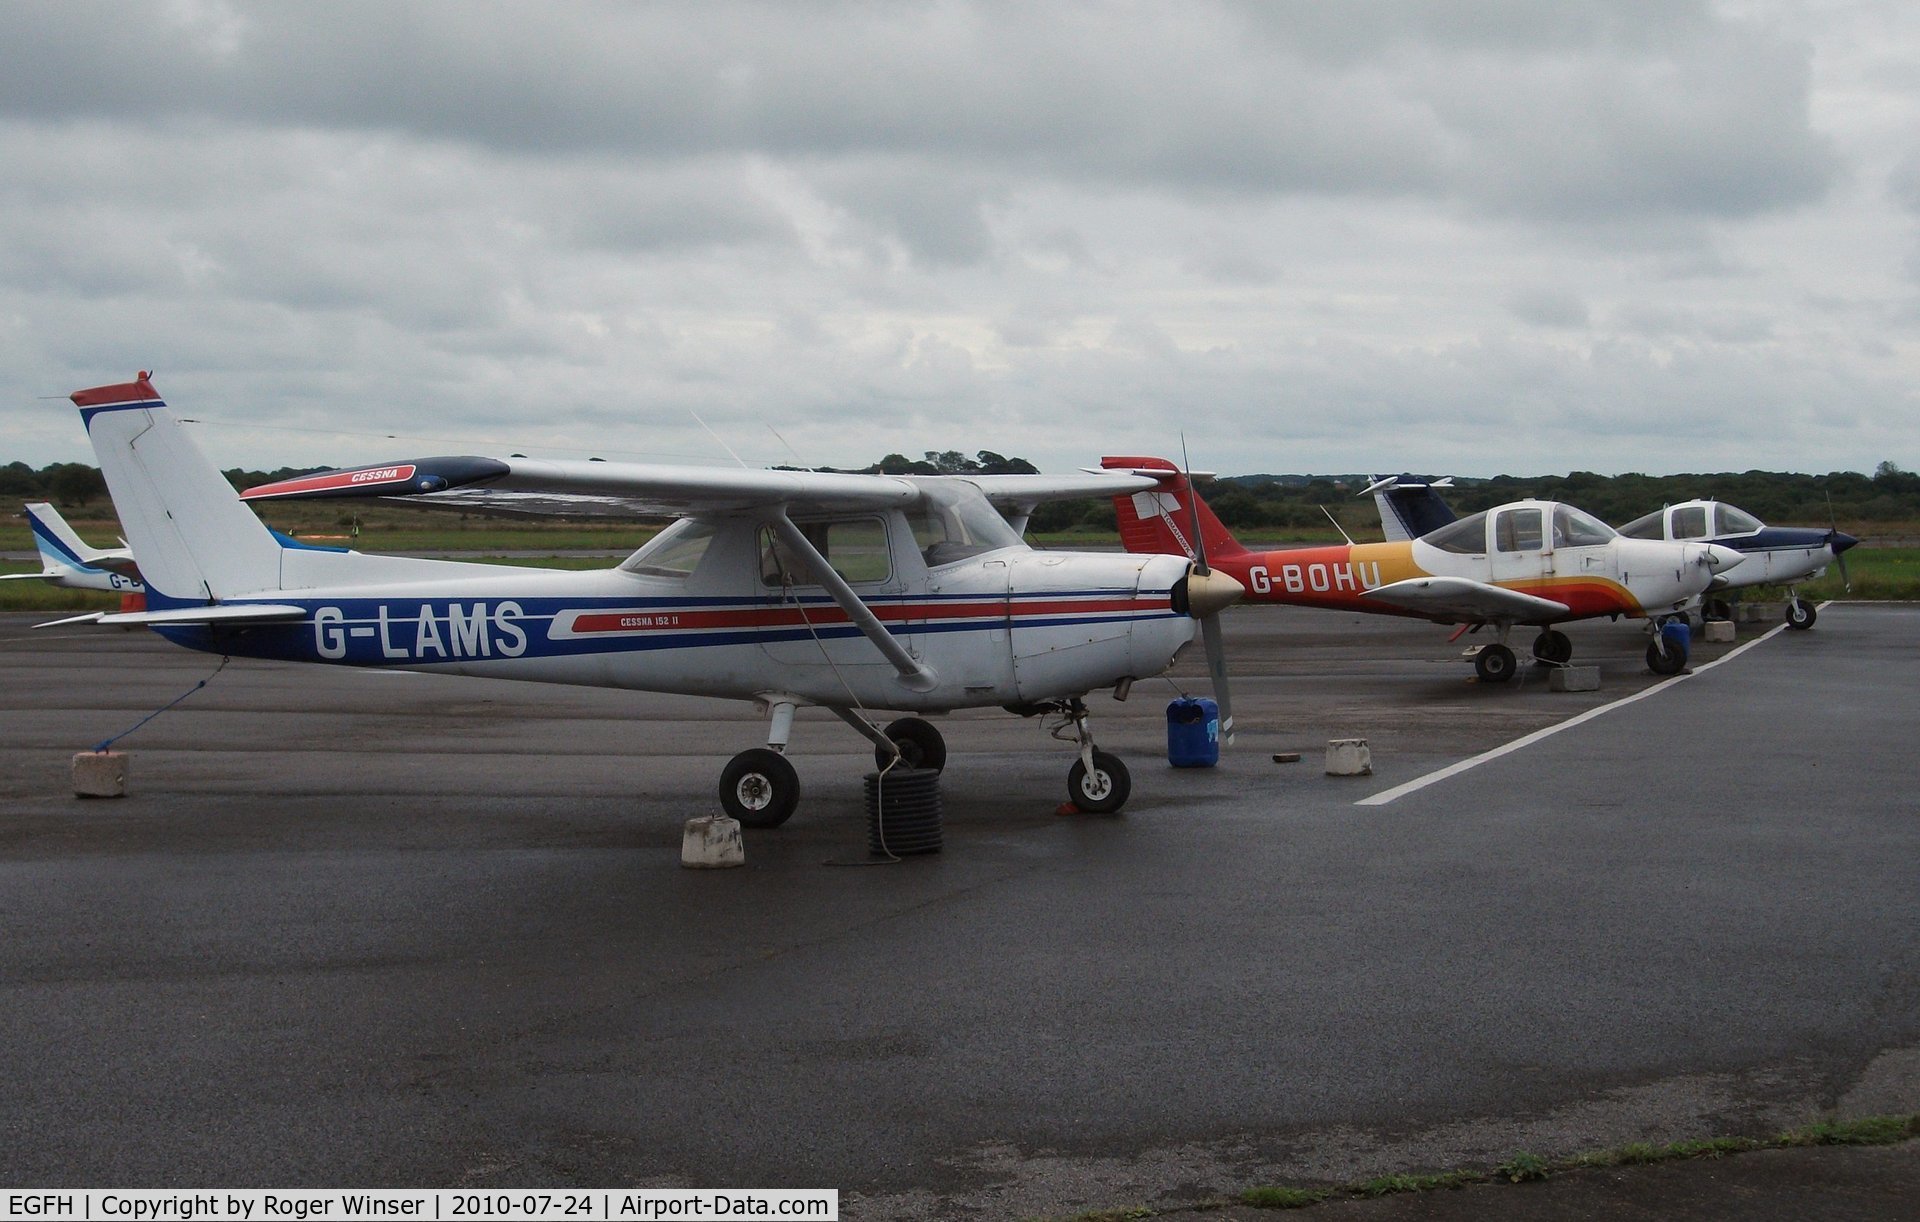 Swansea Airport, Swansea, Wales United Kingdom (EGFH) - Line up of Cambrian Flying School and Club's aircraft.